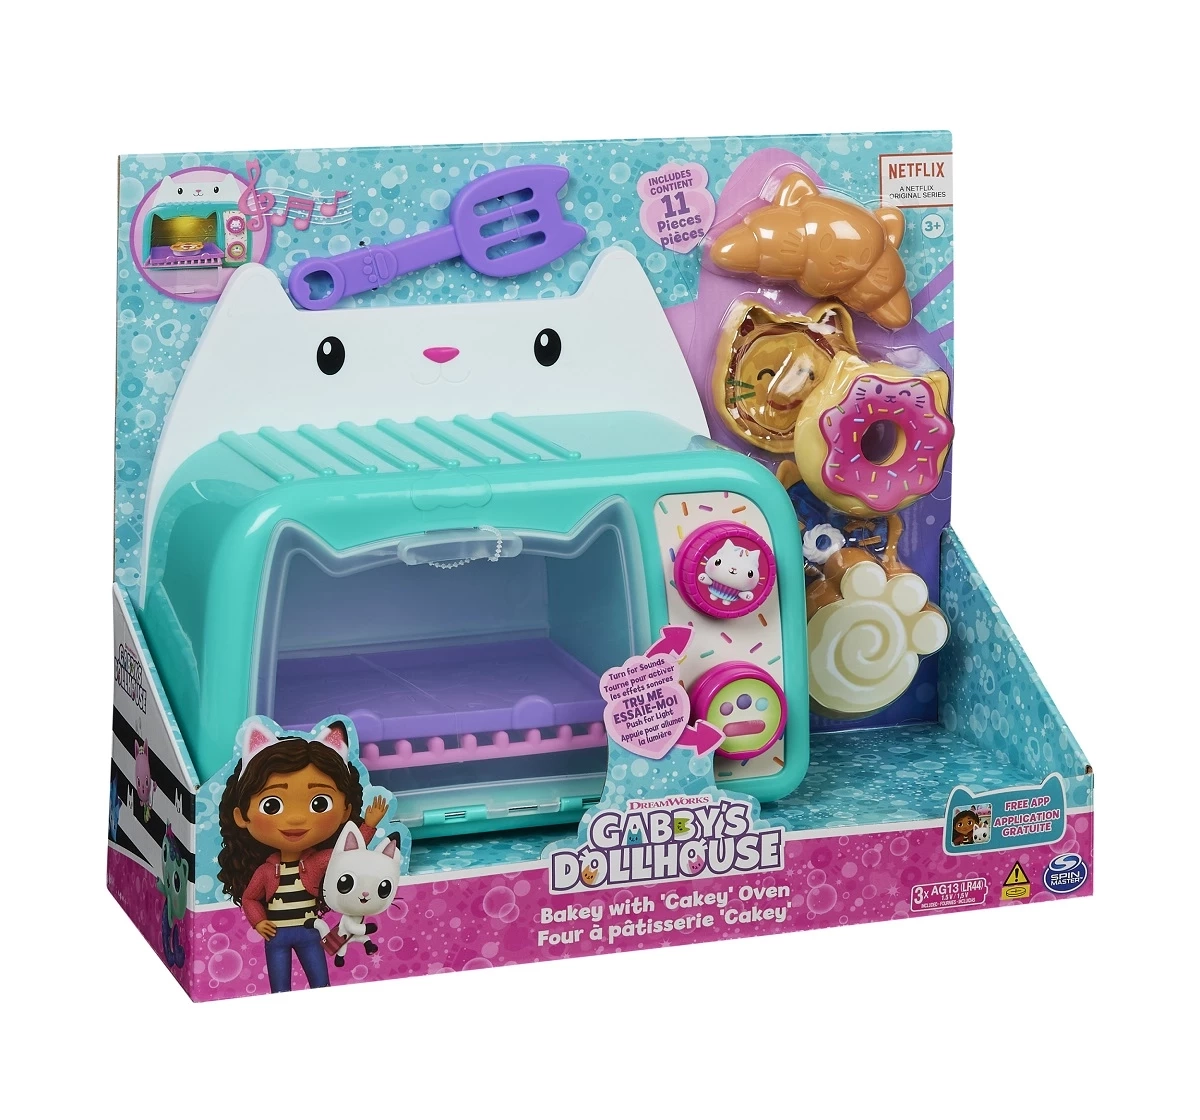 Gabby’S Dollhouse, Bakey With Cakey Oven, Kitchen Toy With Lights And Sounds, Toy Kitchen Accessories And Play Food, Kids Toys For Ages 3 And Up